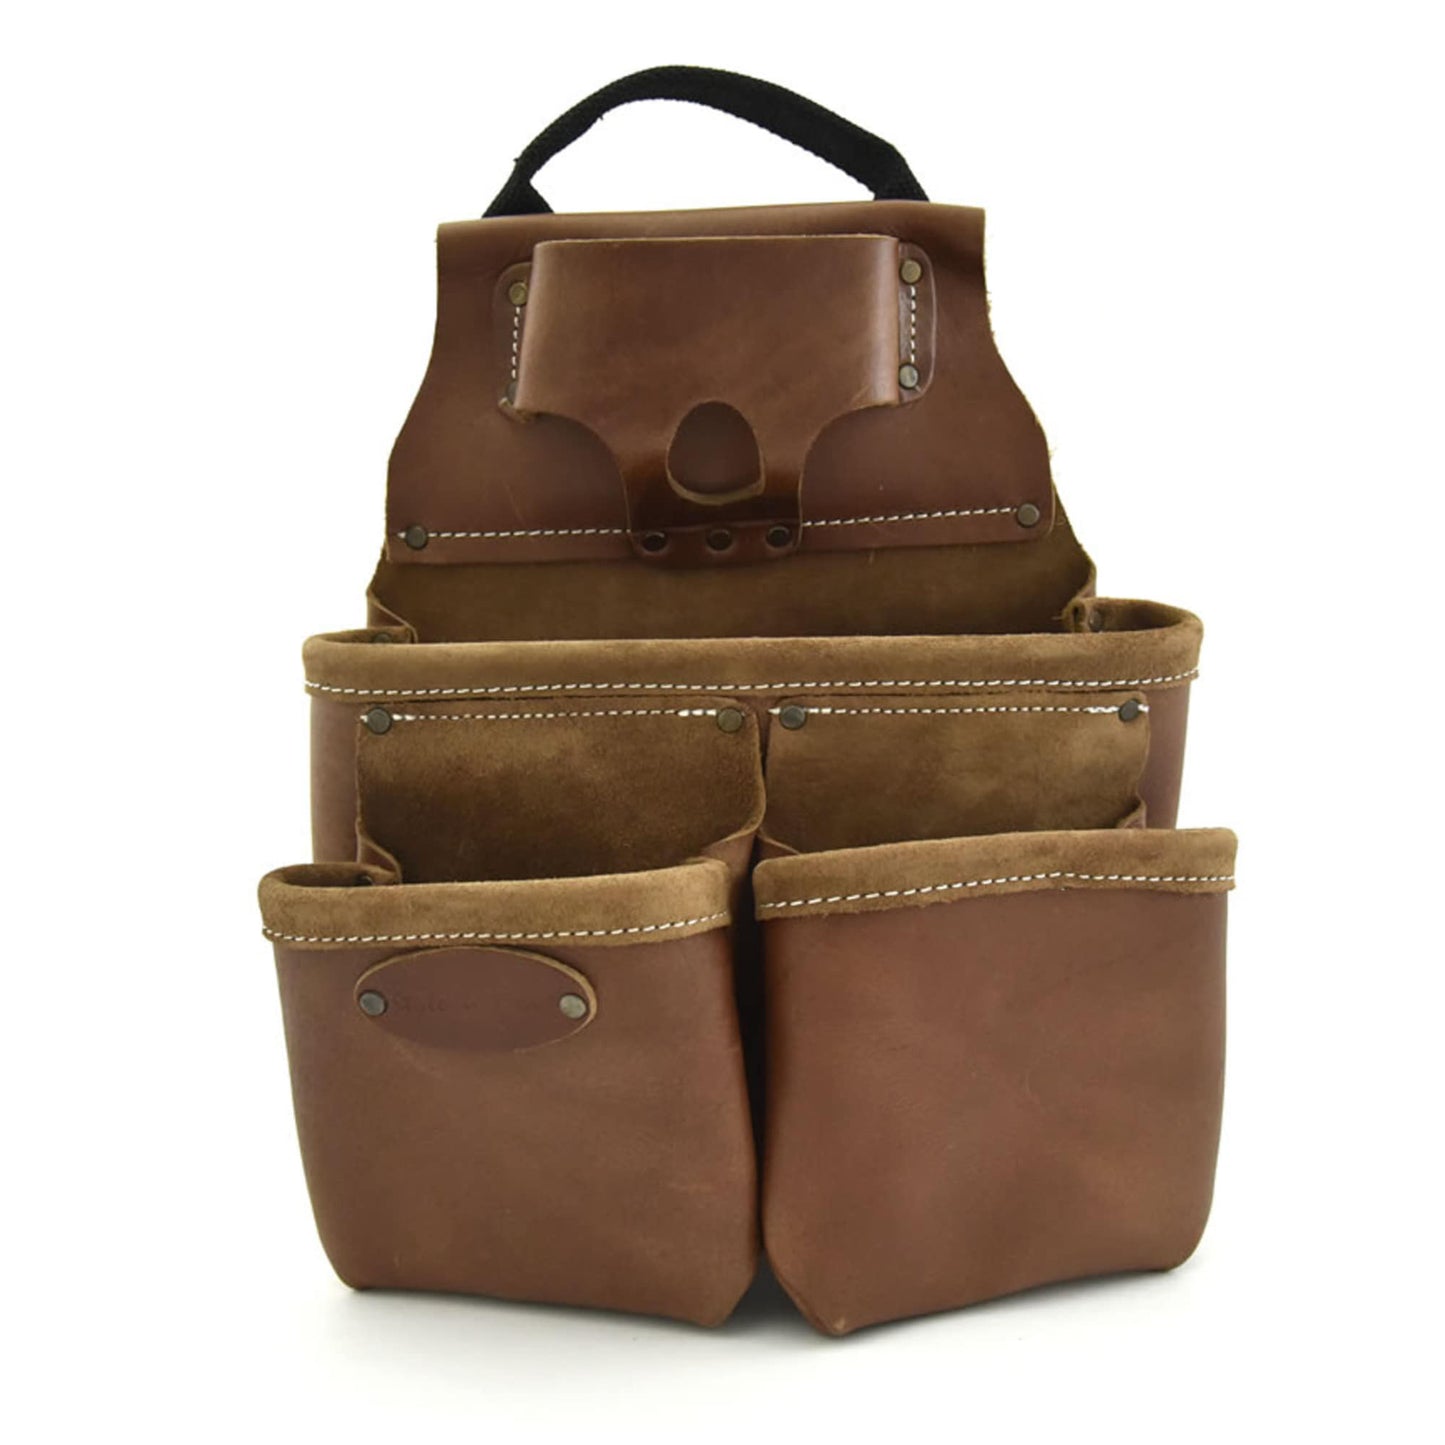 Style n Craft 98435 - 9 Pocket Framer's Nail & Tool Pouch in Full Grain Leather in Dark Tan Color - Front View showing the 2 front pockets  in front of the main pouch and the tape holder on the top of the pouch and the easy carry handle on top of the pouch